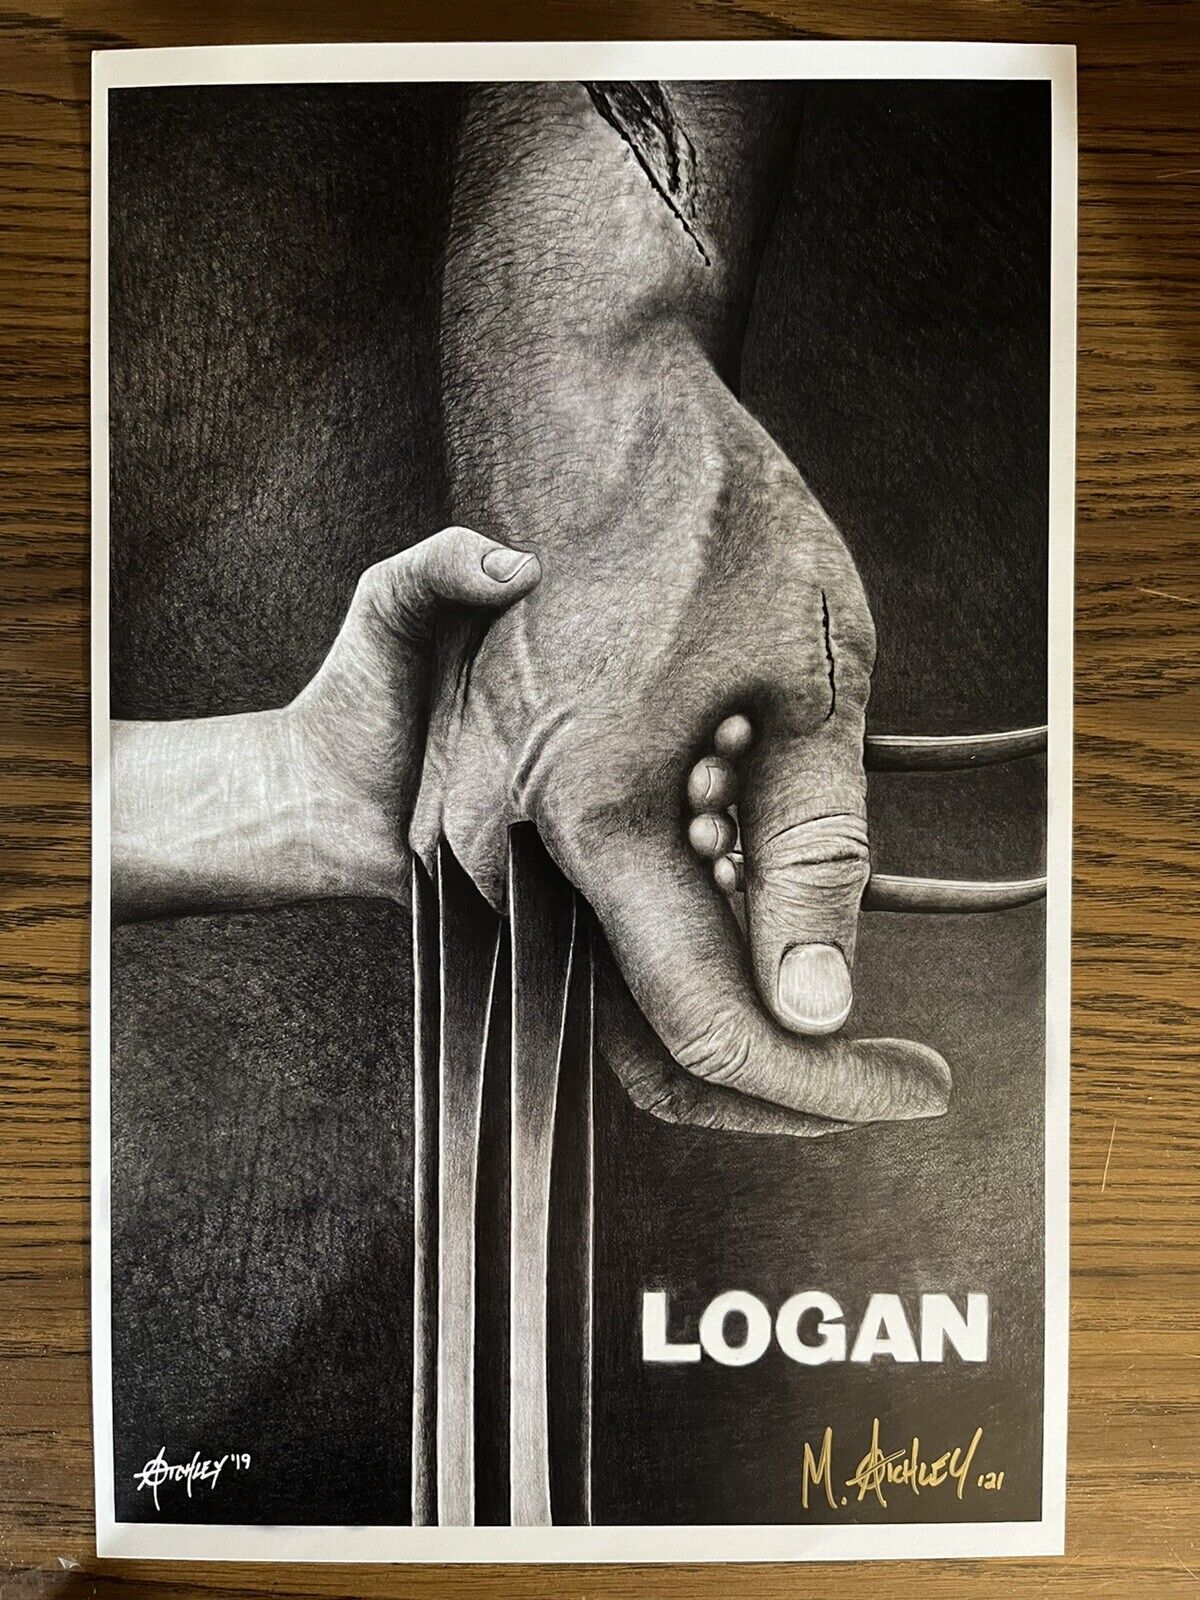 LOGAN WOLVERINE HAND SIGNED 11X17 PRINT BY ARTIST MATTHEW ATCHLEY #121 OF 2020